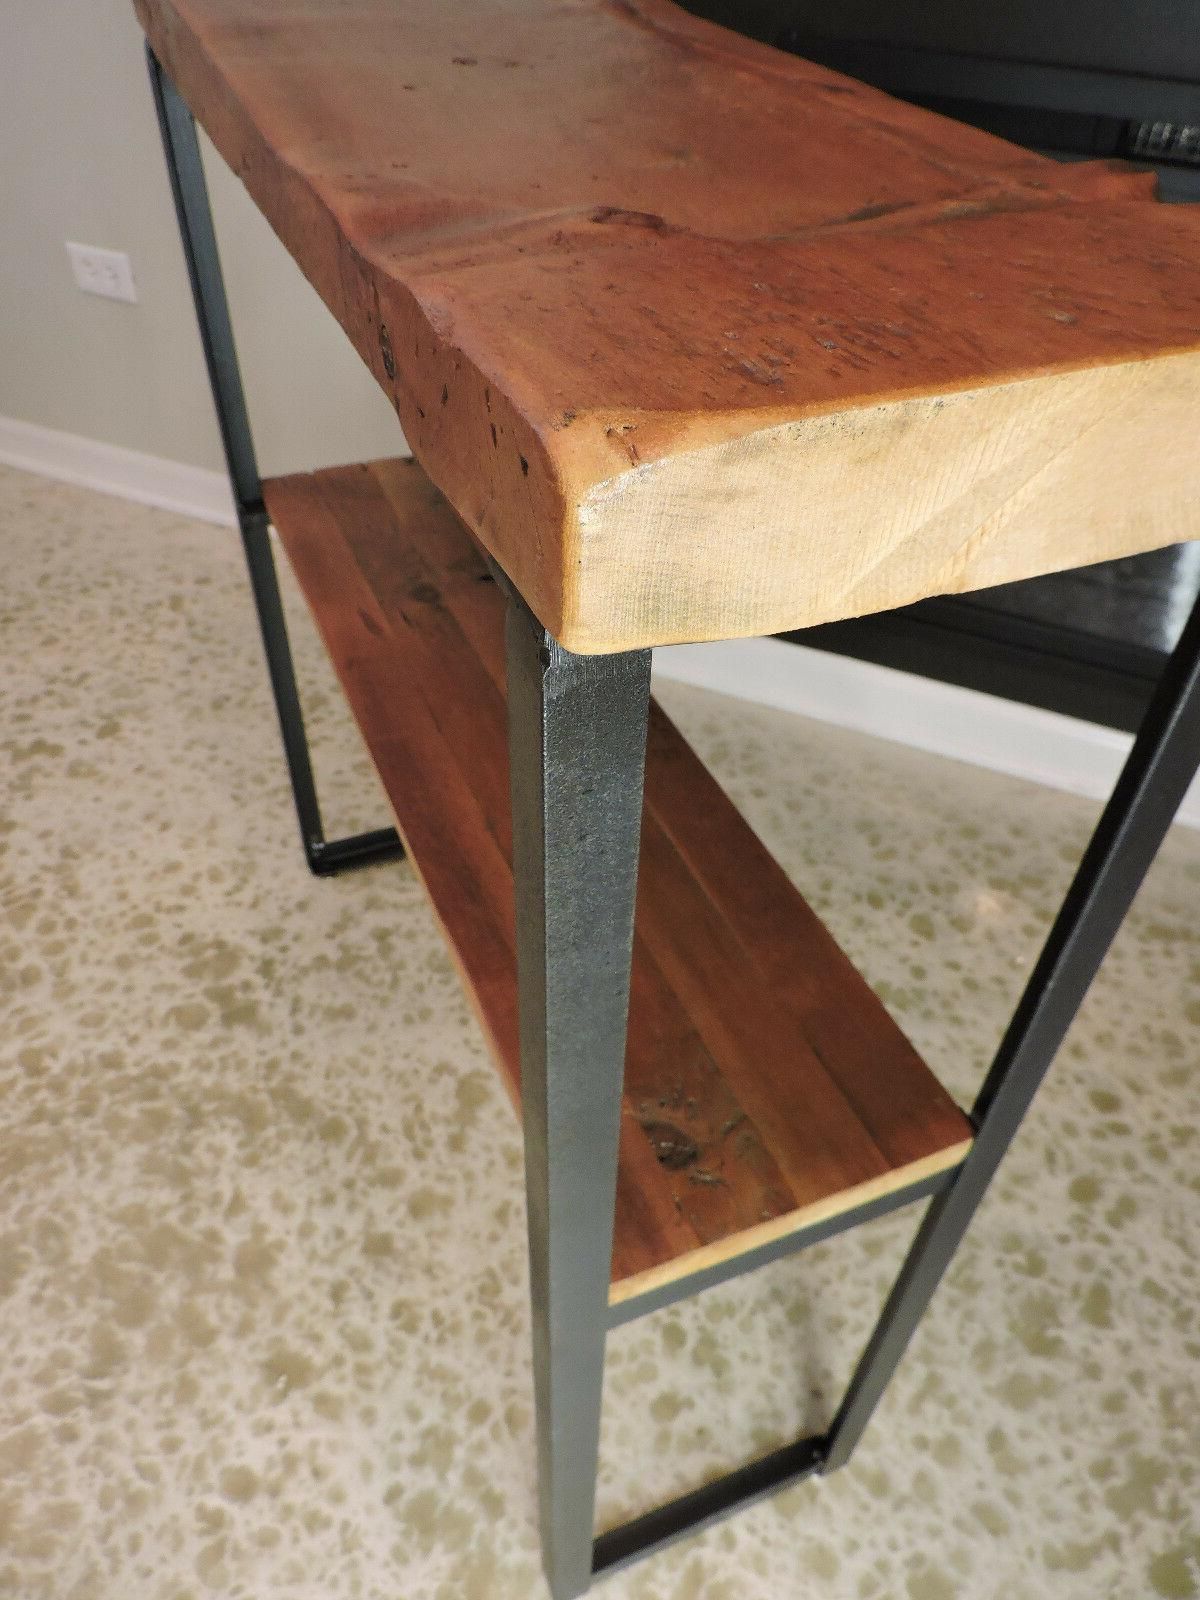 Barn Wood Console Table, Uniquely Worn Rustic Top, Pertaining To Rustic Barnside Console Tables (Gallery 19 of 20)